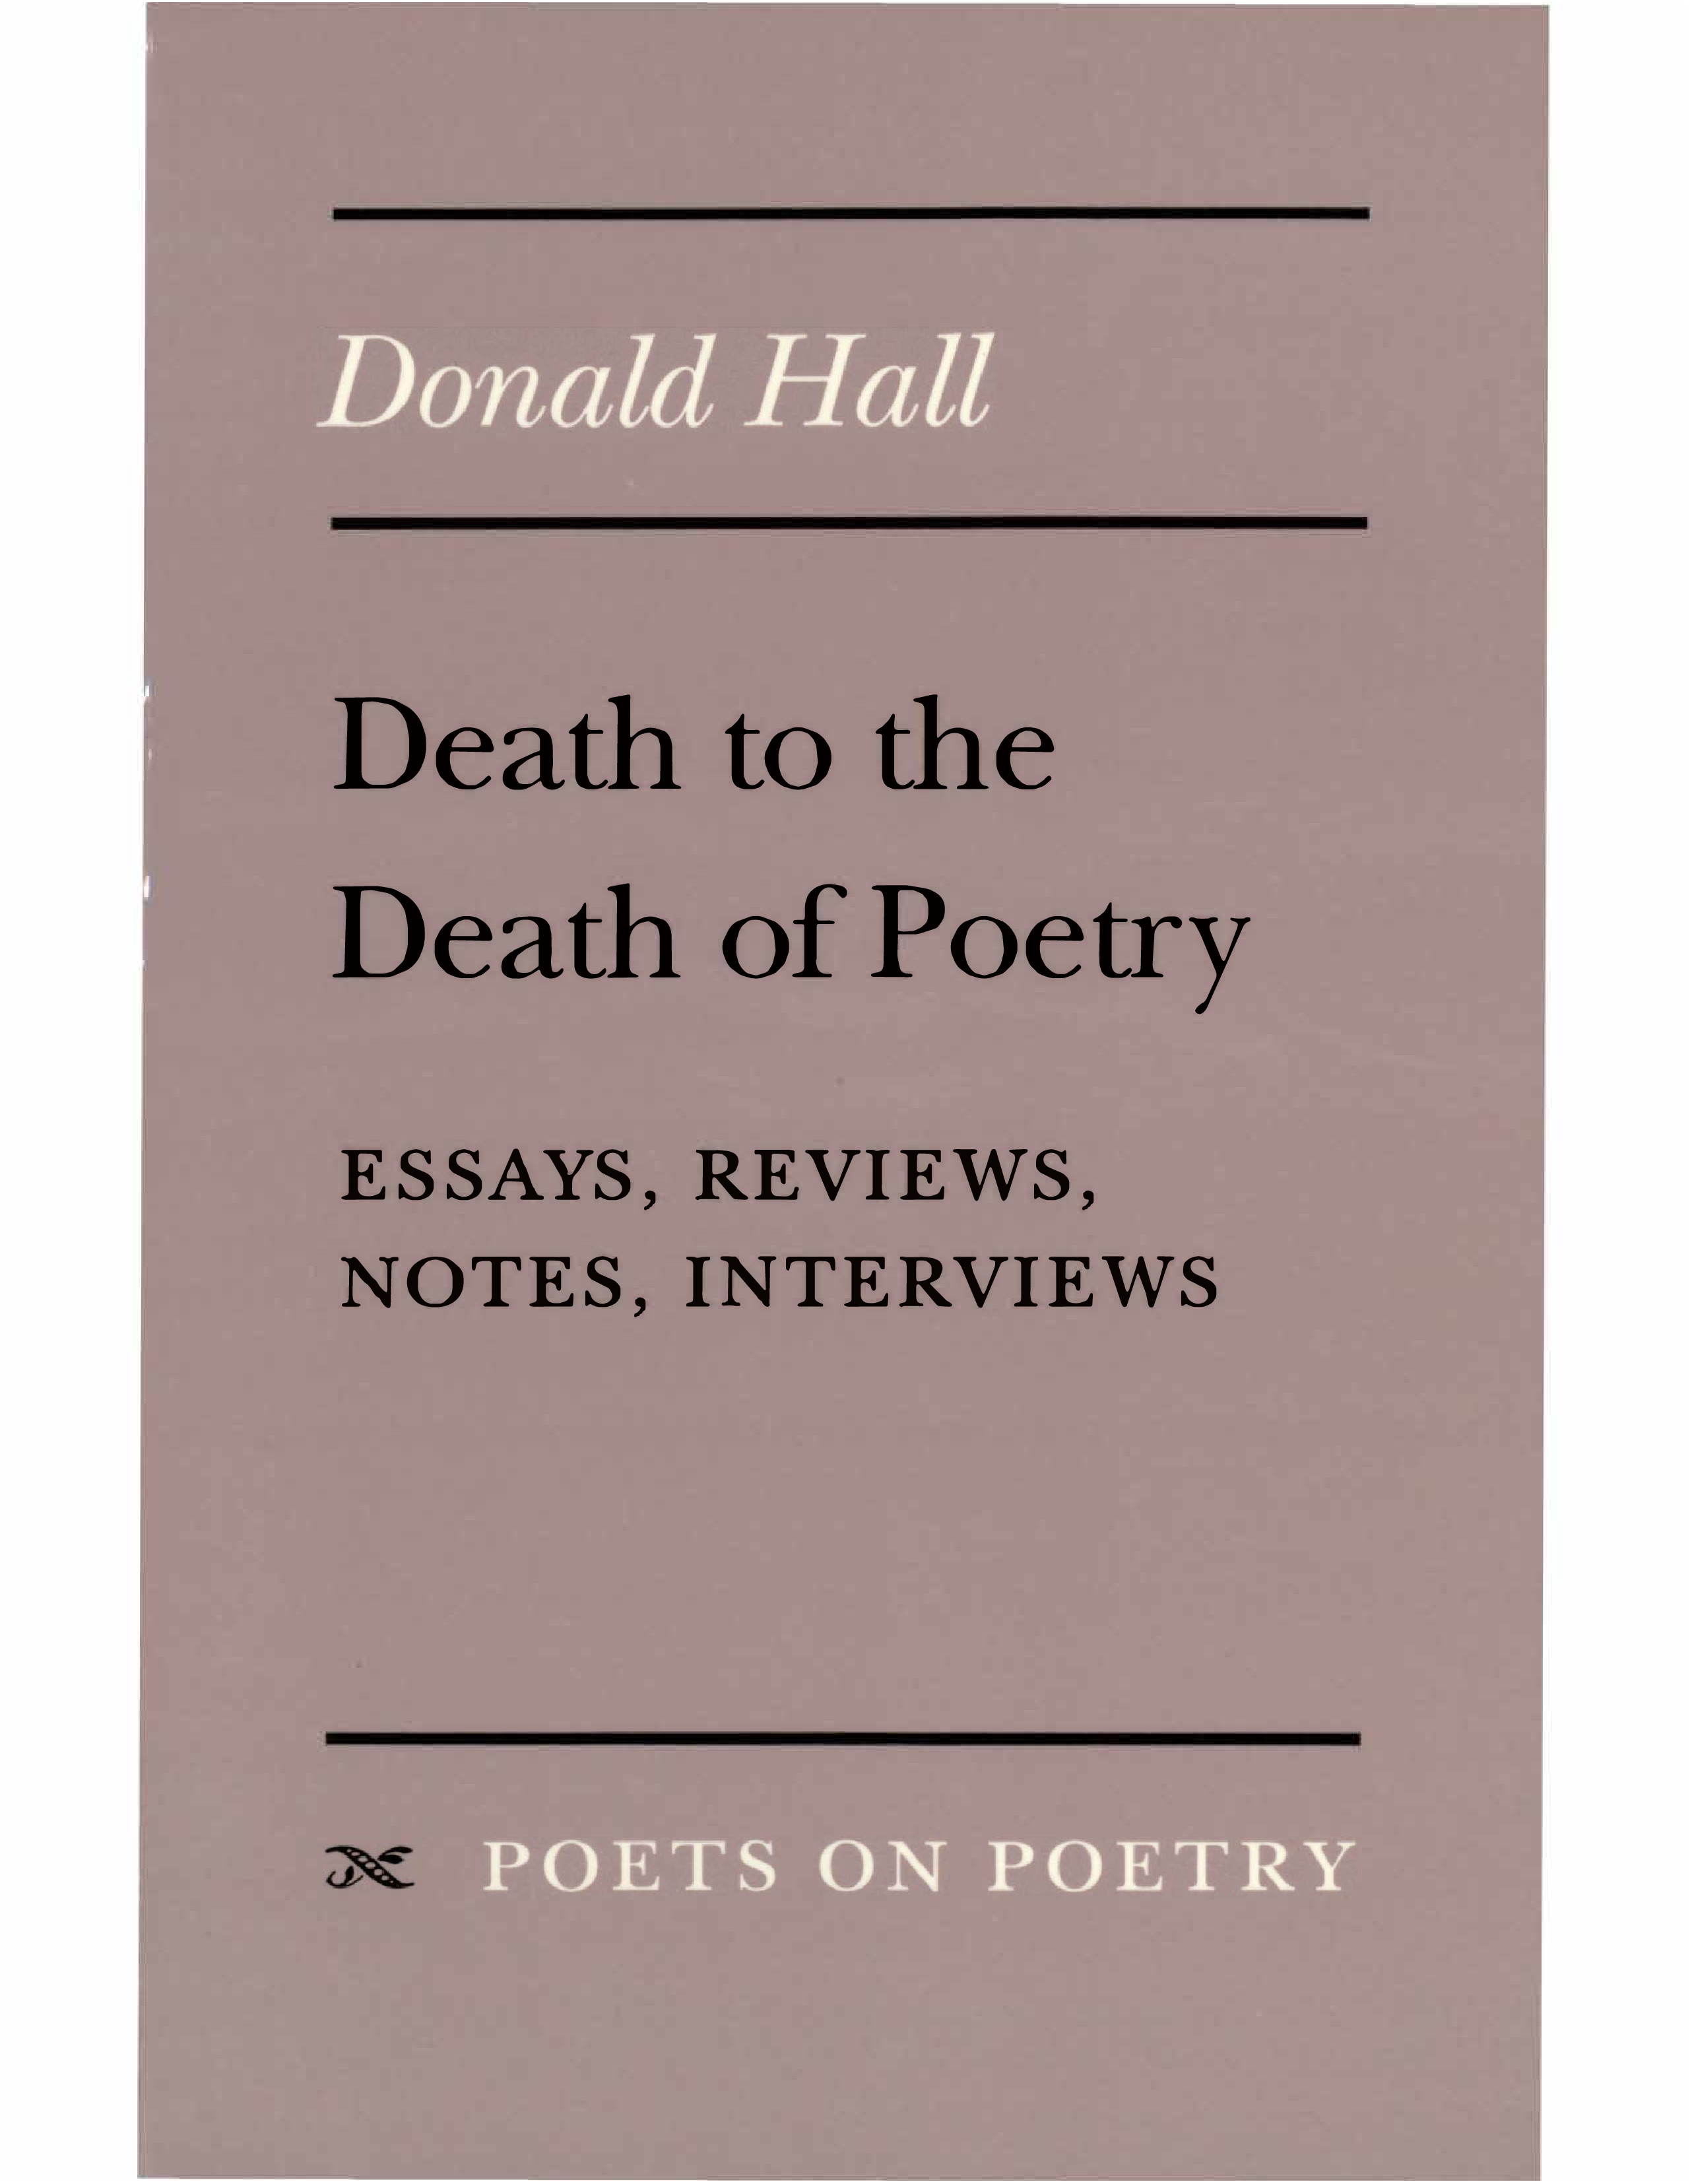 Cover of Donald Hall, Death to the Death of Poetry